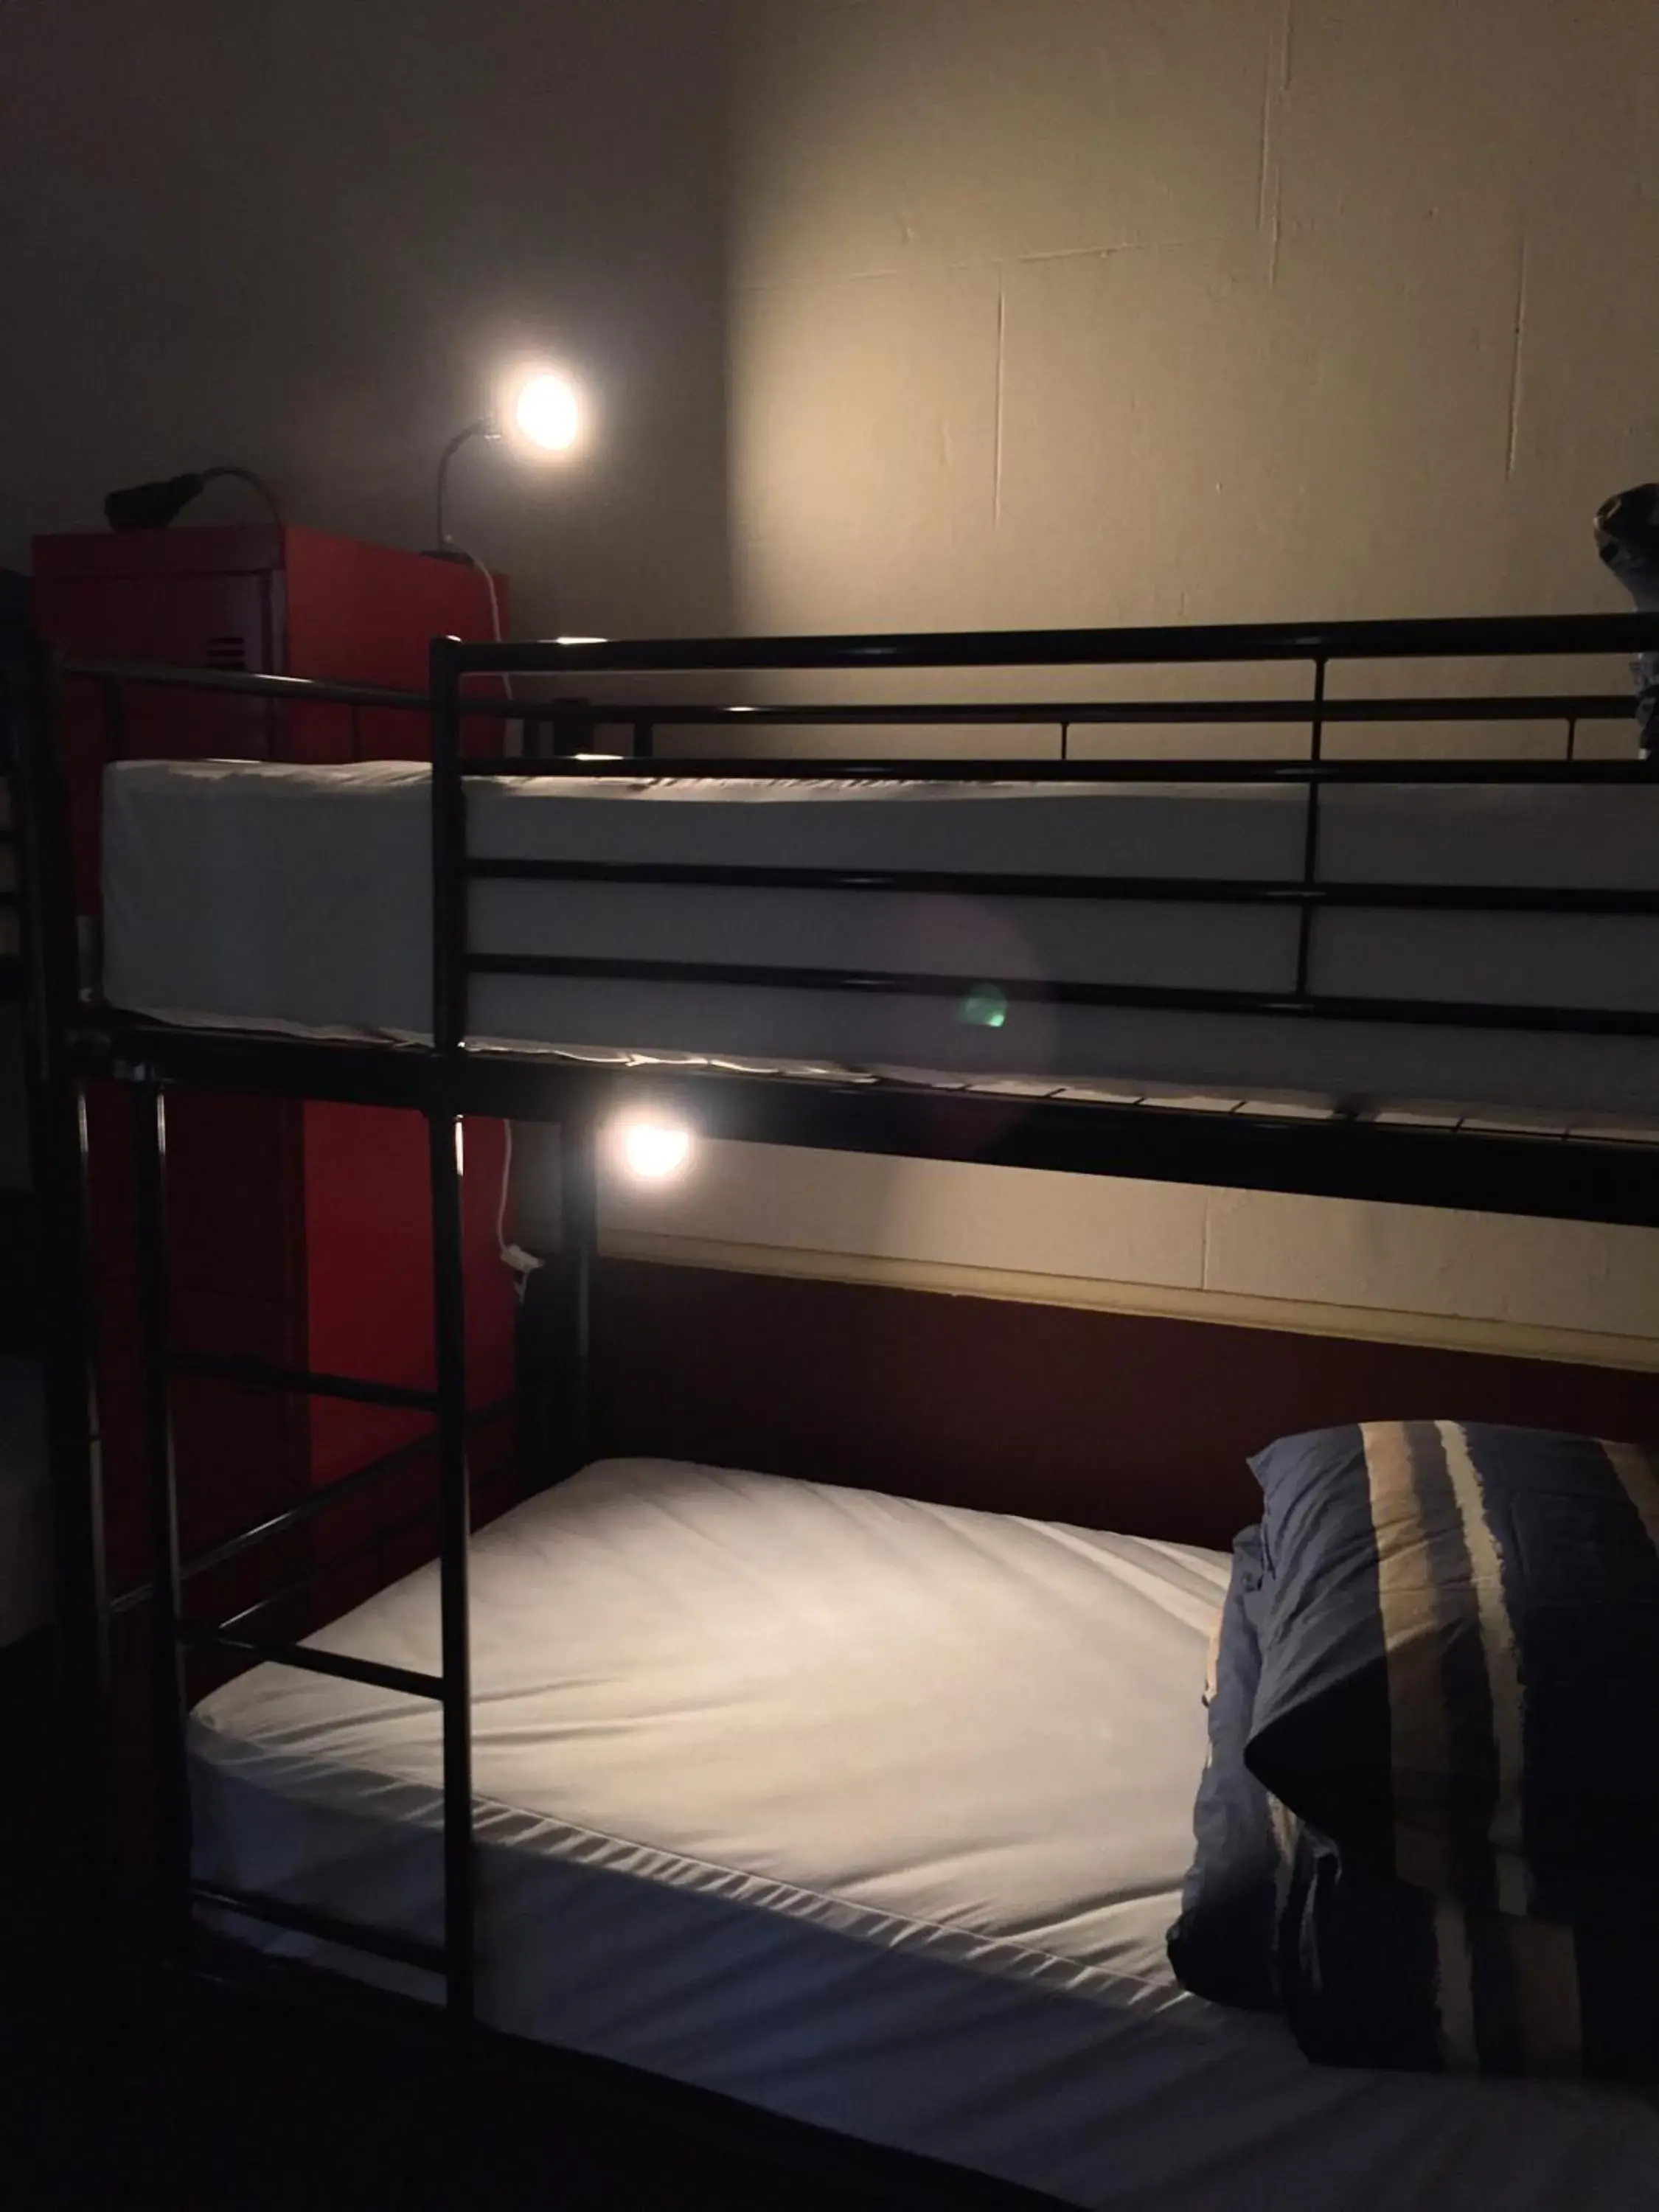 Bed in 8-Bed Mixed Dormitory Room in Fremantle Prison YHA